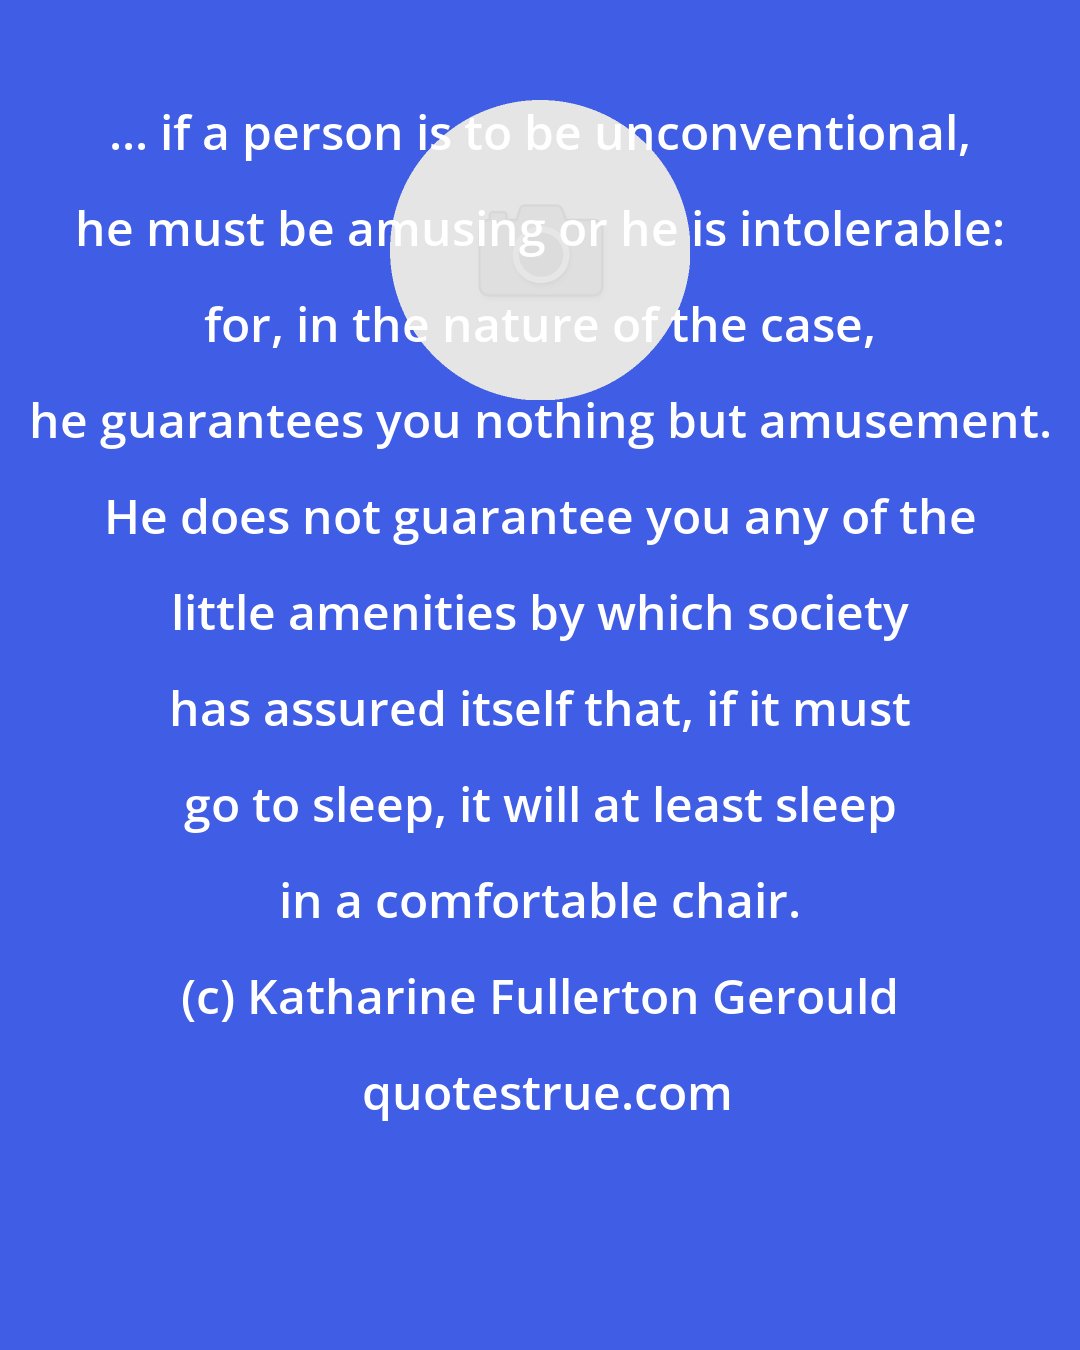 Katharine Fullerton Gerould: ... if a person is to be unconventional, he must be amusing or he is intolerable: for, in the nature of the case, he guarantees you nothing but amusement. He does not guarantee you any of the little amenities by which society has assured itself that, if it must go to sleep, it will at least sleep in a comfortable chair.